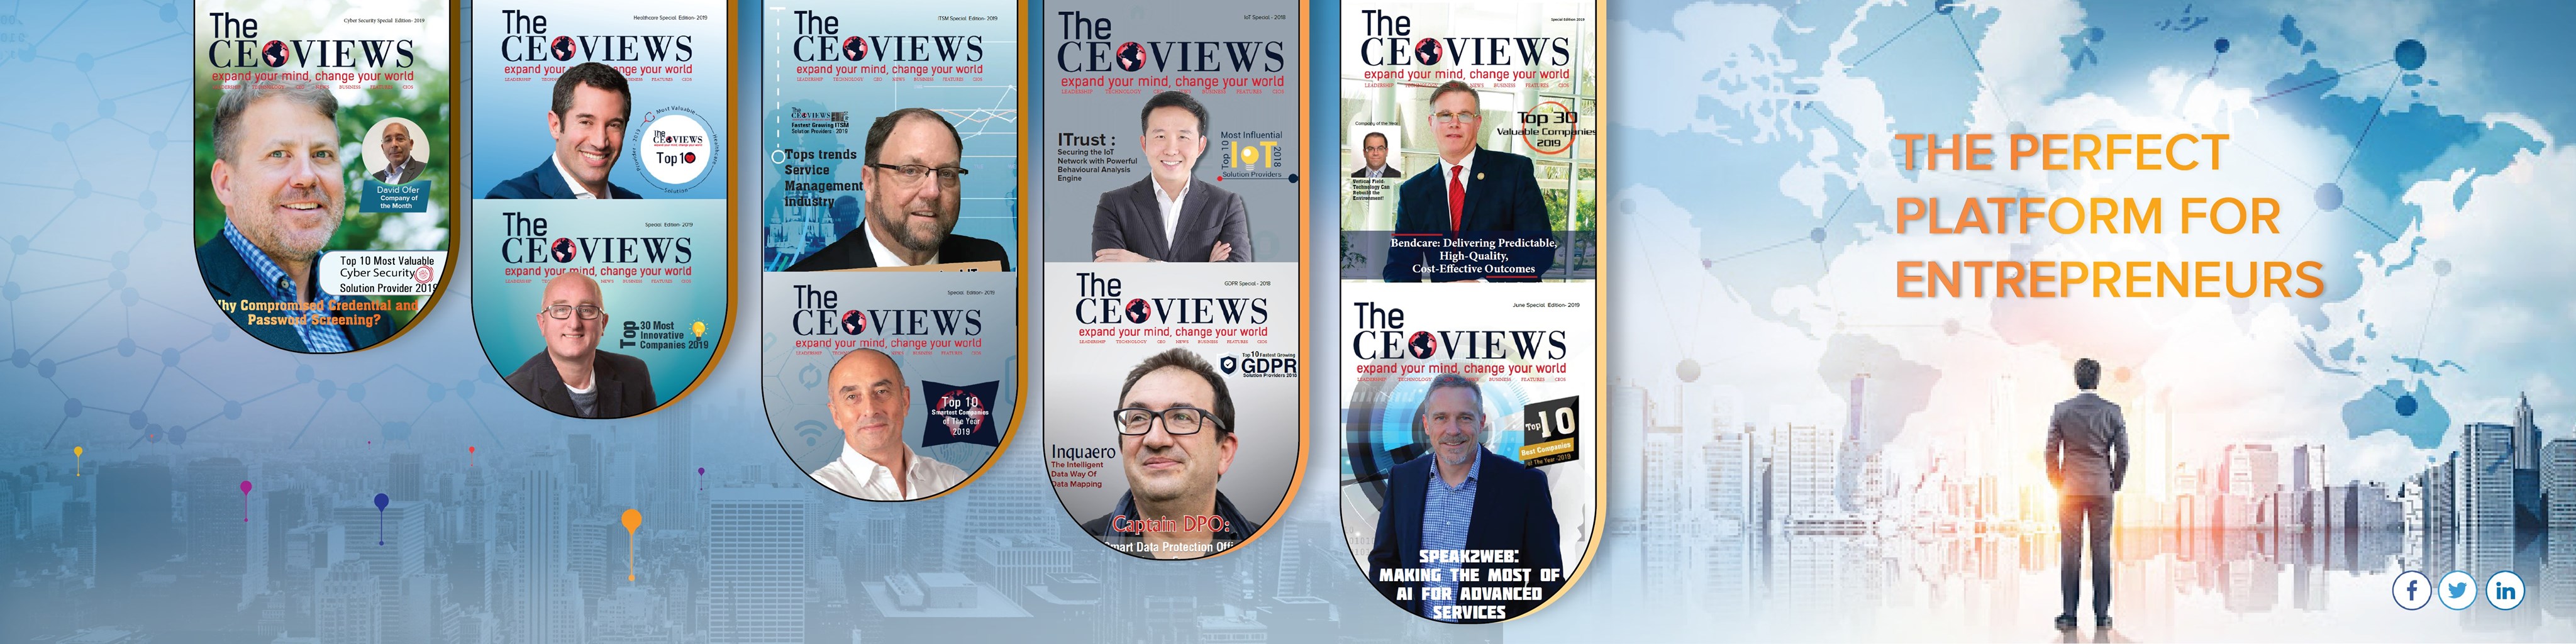 Why Should You Read Business Magazines? – The CEO Views